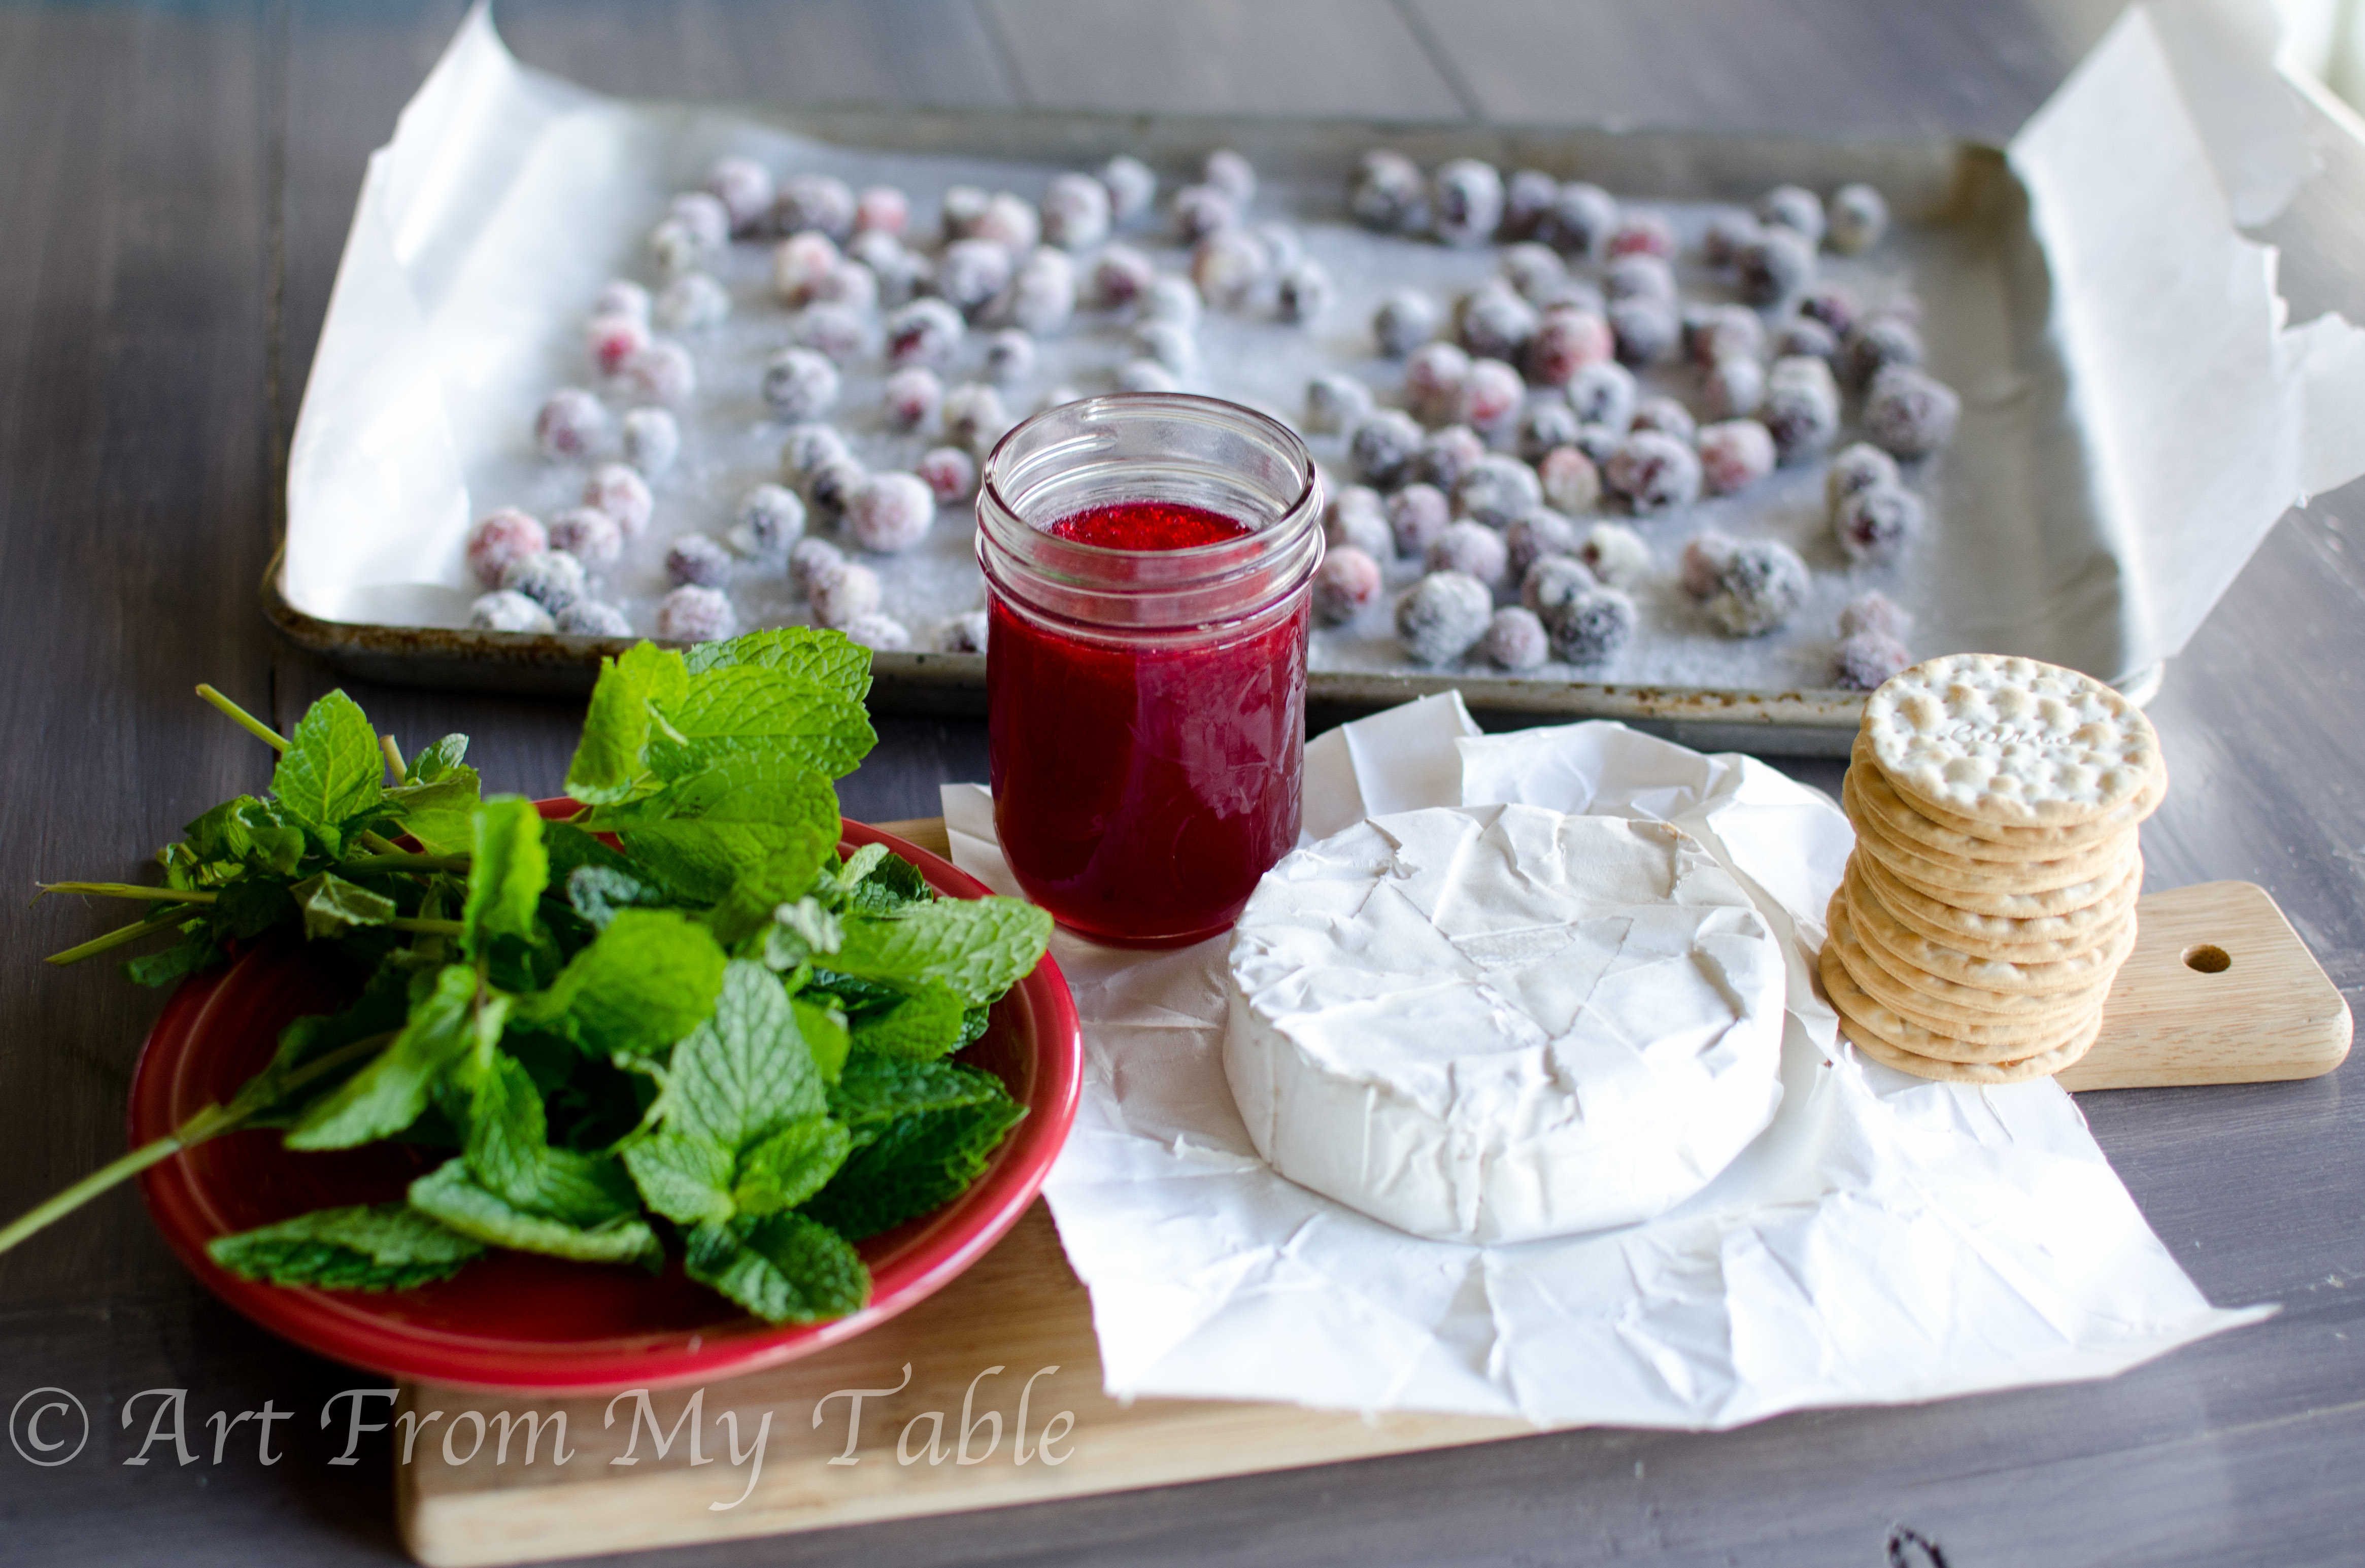 Ingredients for cranberry brie bites: crackers, brie, cranberry sauce, sugared cranberries, and fresh mint leaves.